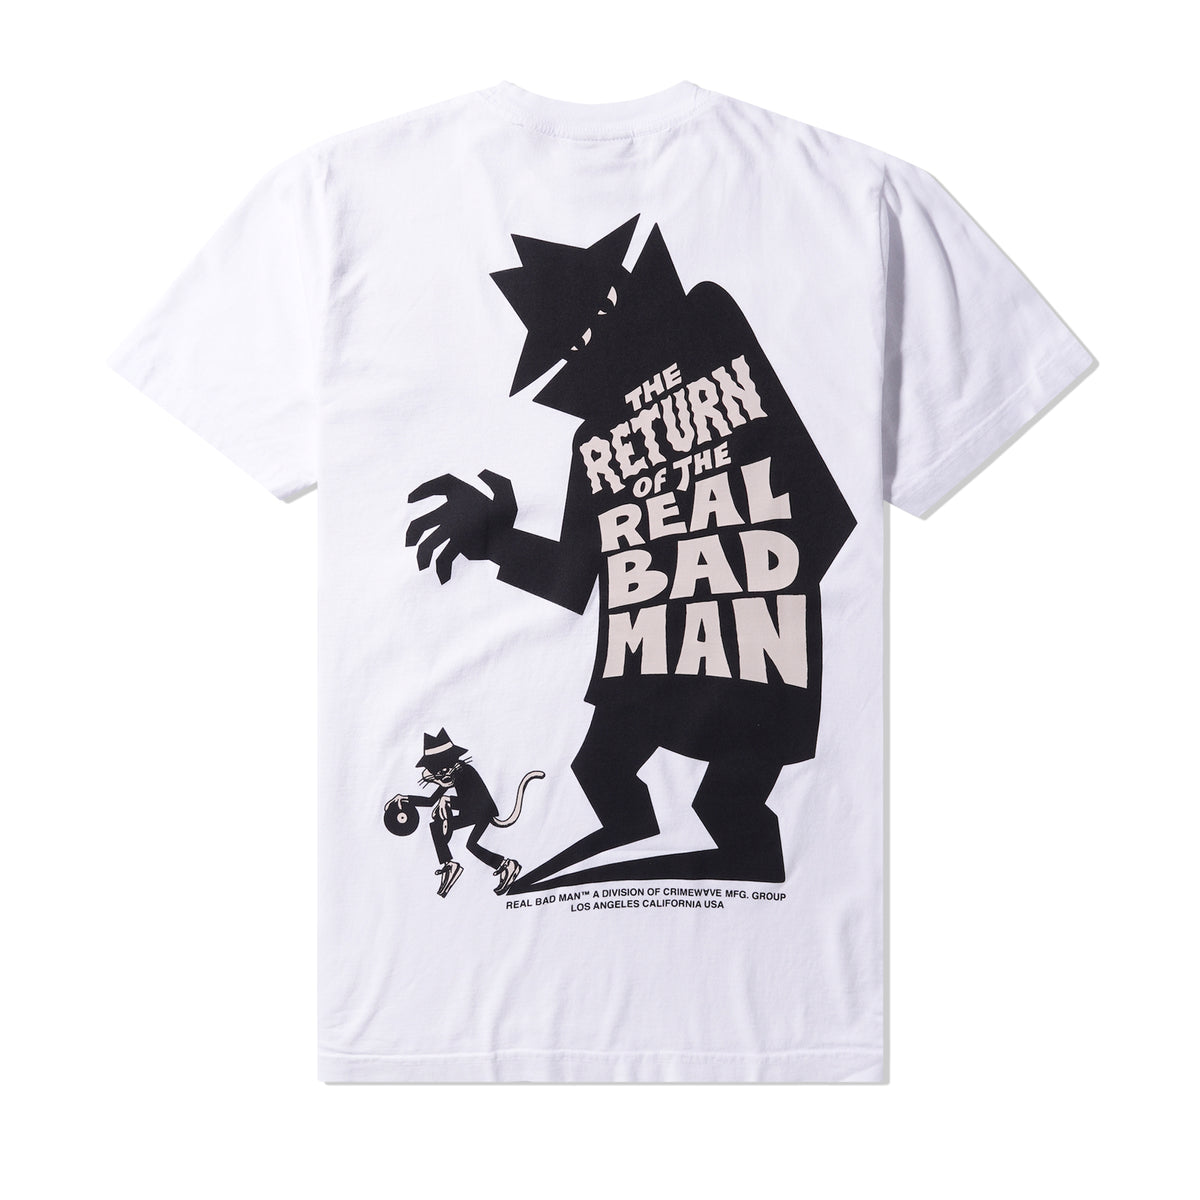 Shop for Return Of The RBM Tee, White Real Bad Man today